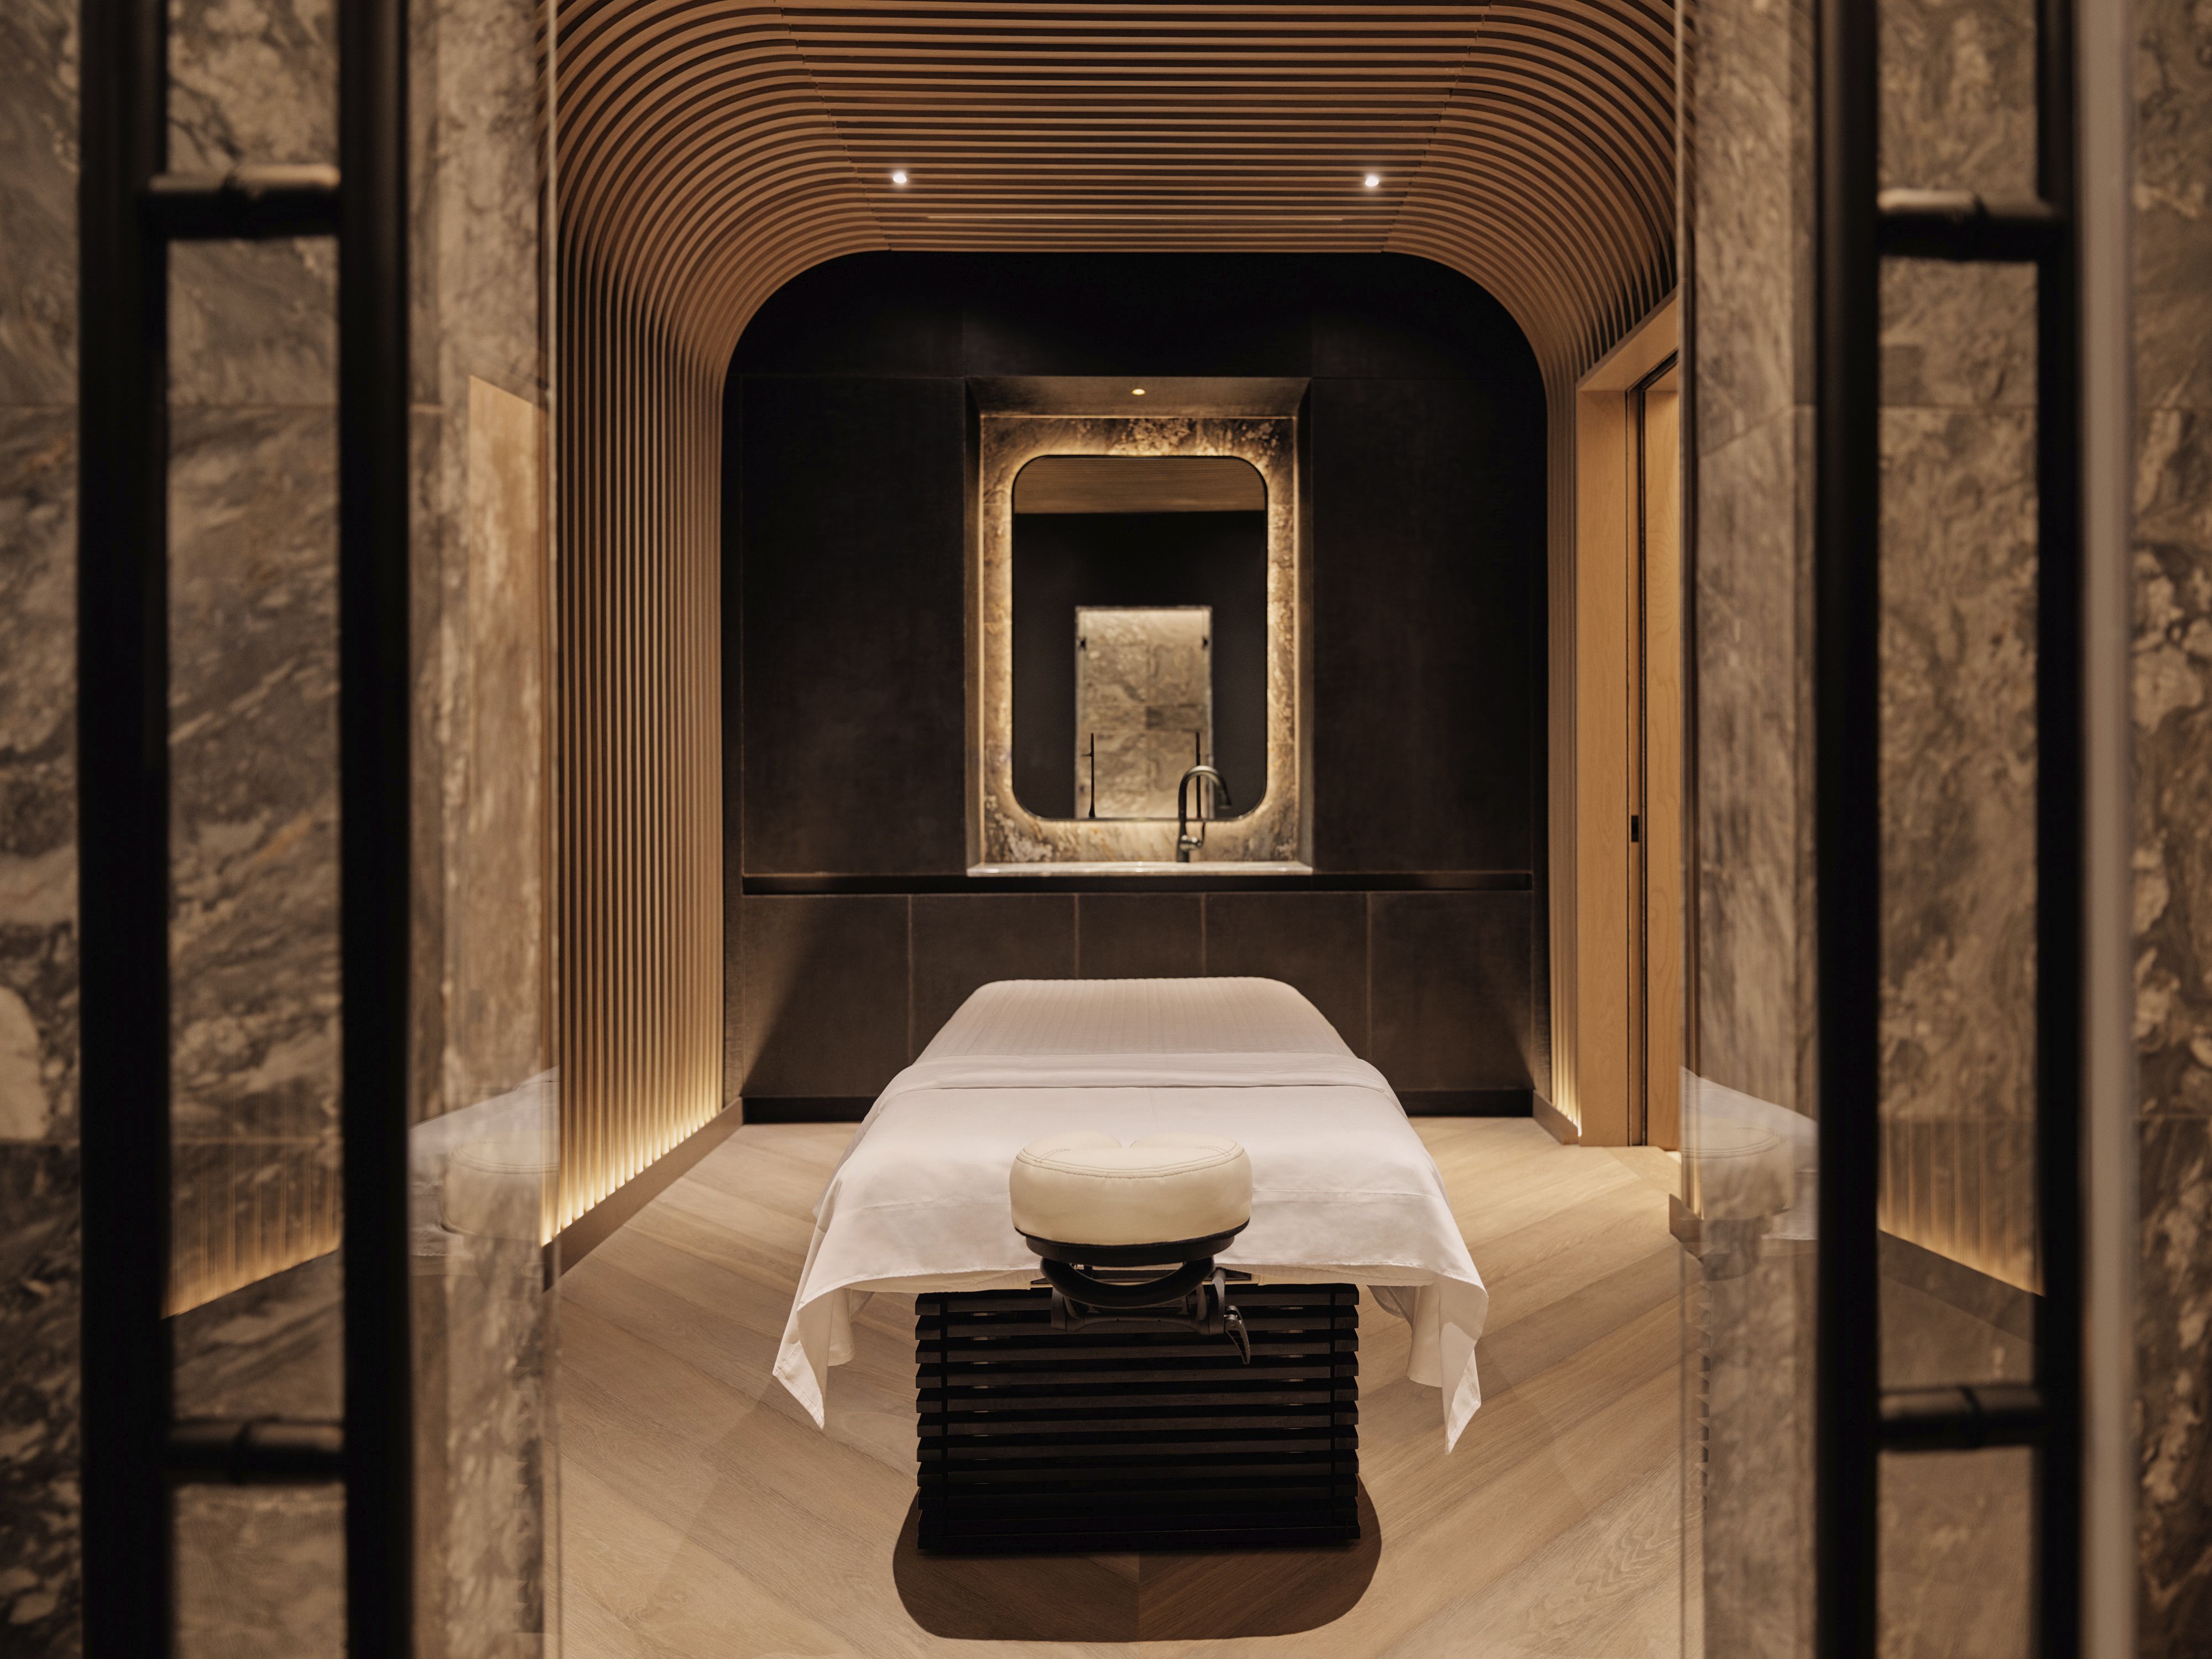 Discreet Service In Massage - 10 Best NYC Spas - Top Spa Treatments in New York City